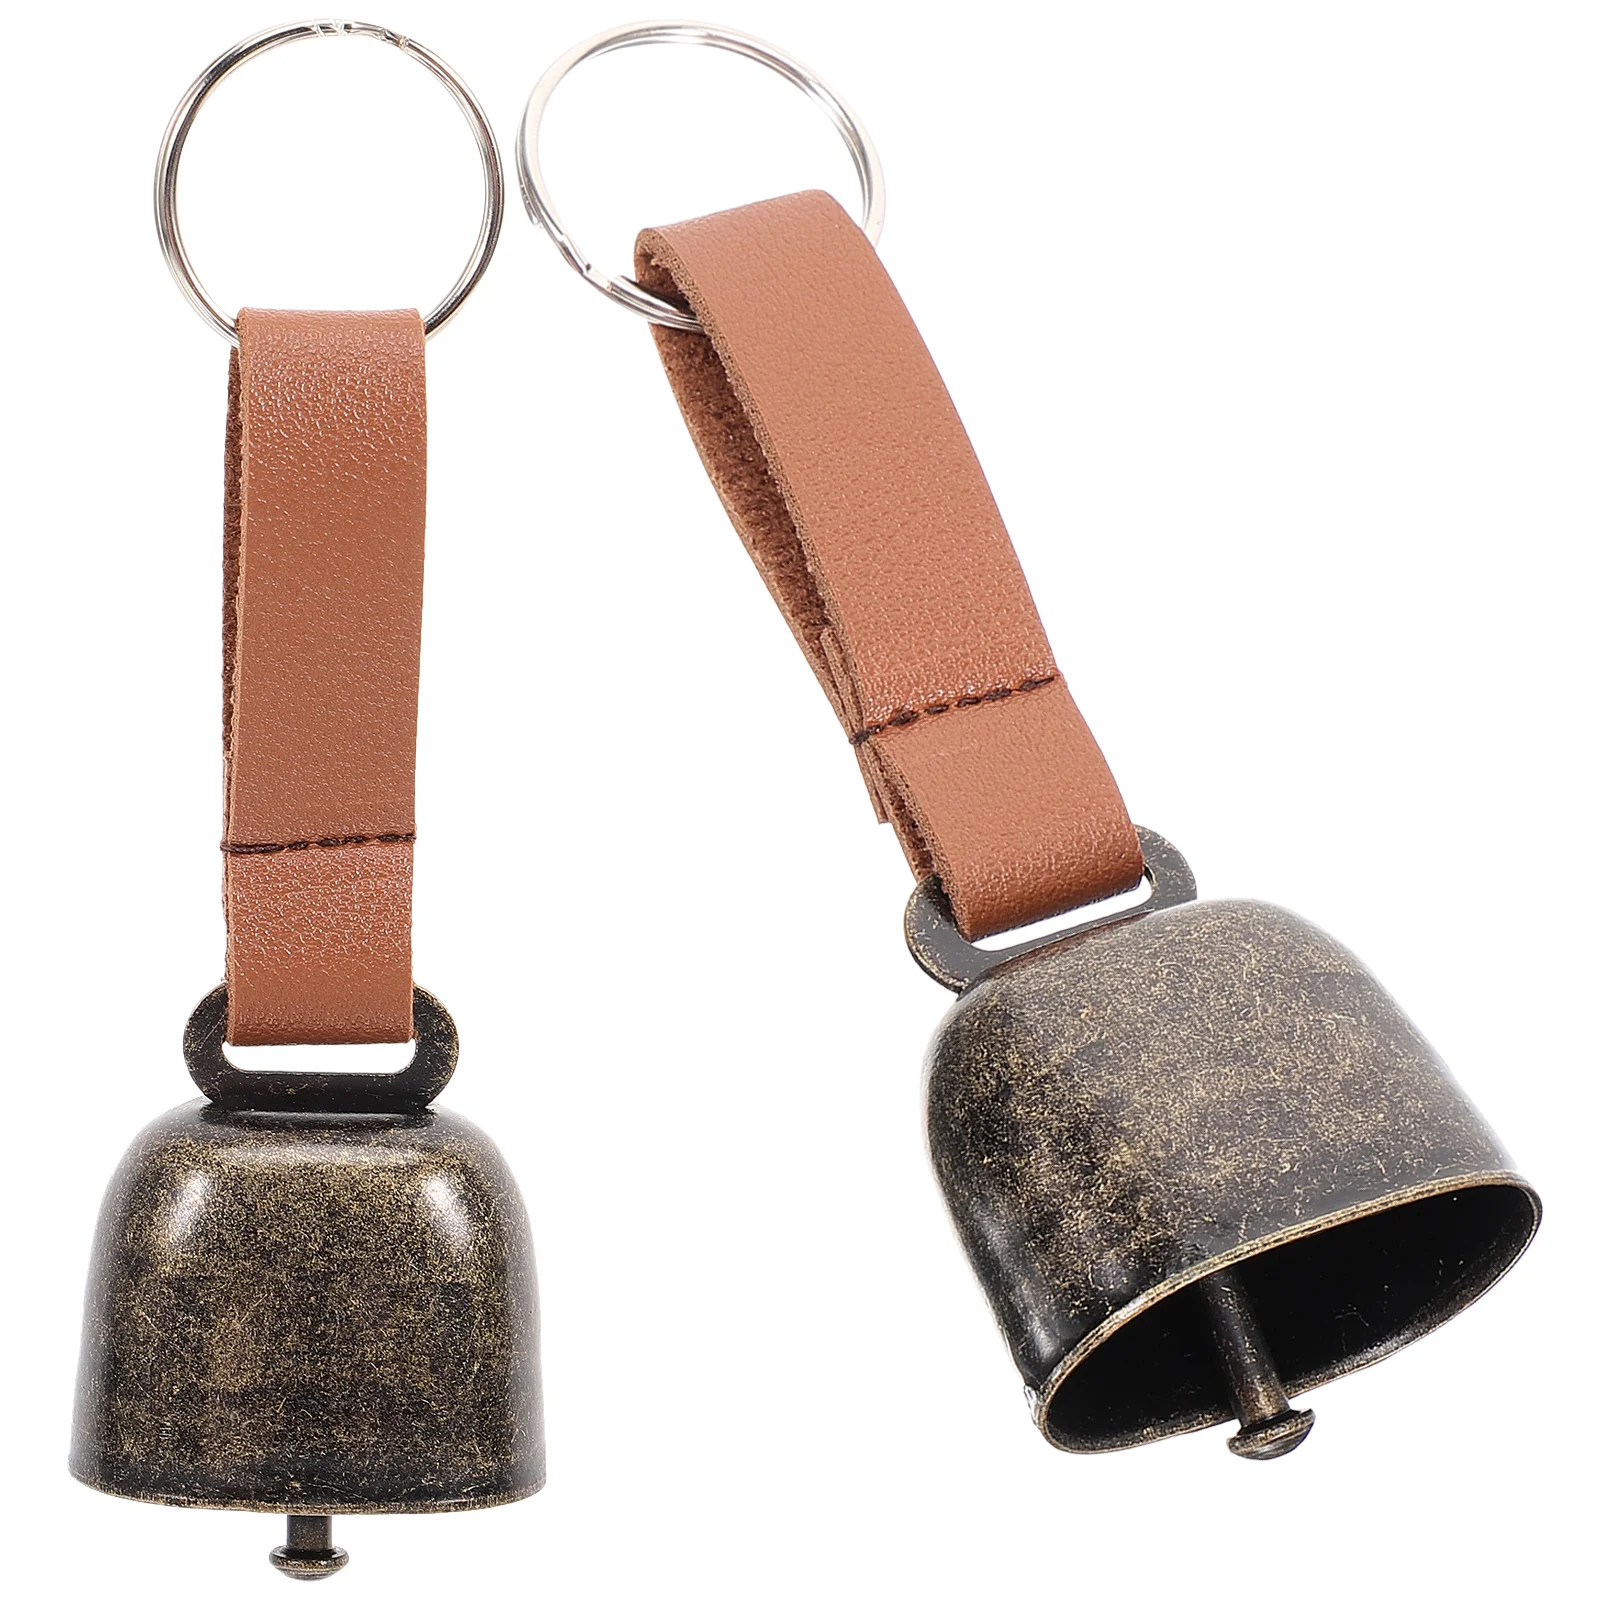 

2 Pcs Bear Repelling Bell Traveling Hanging Loud Metal Bells for Cattle Hiking Outdoor Climbing